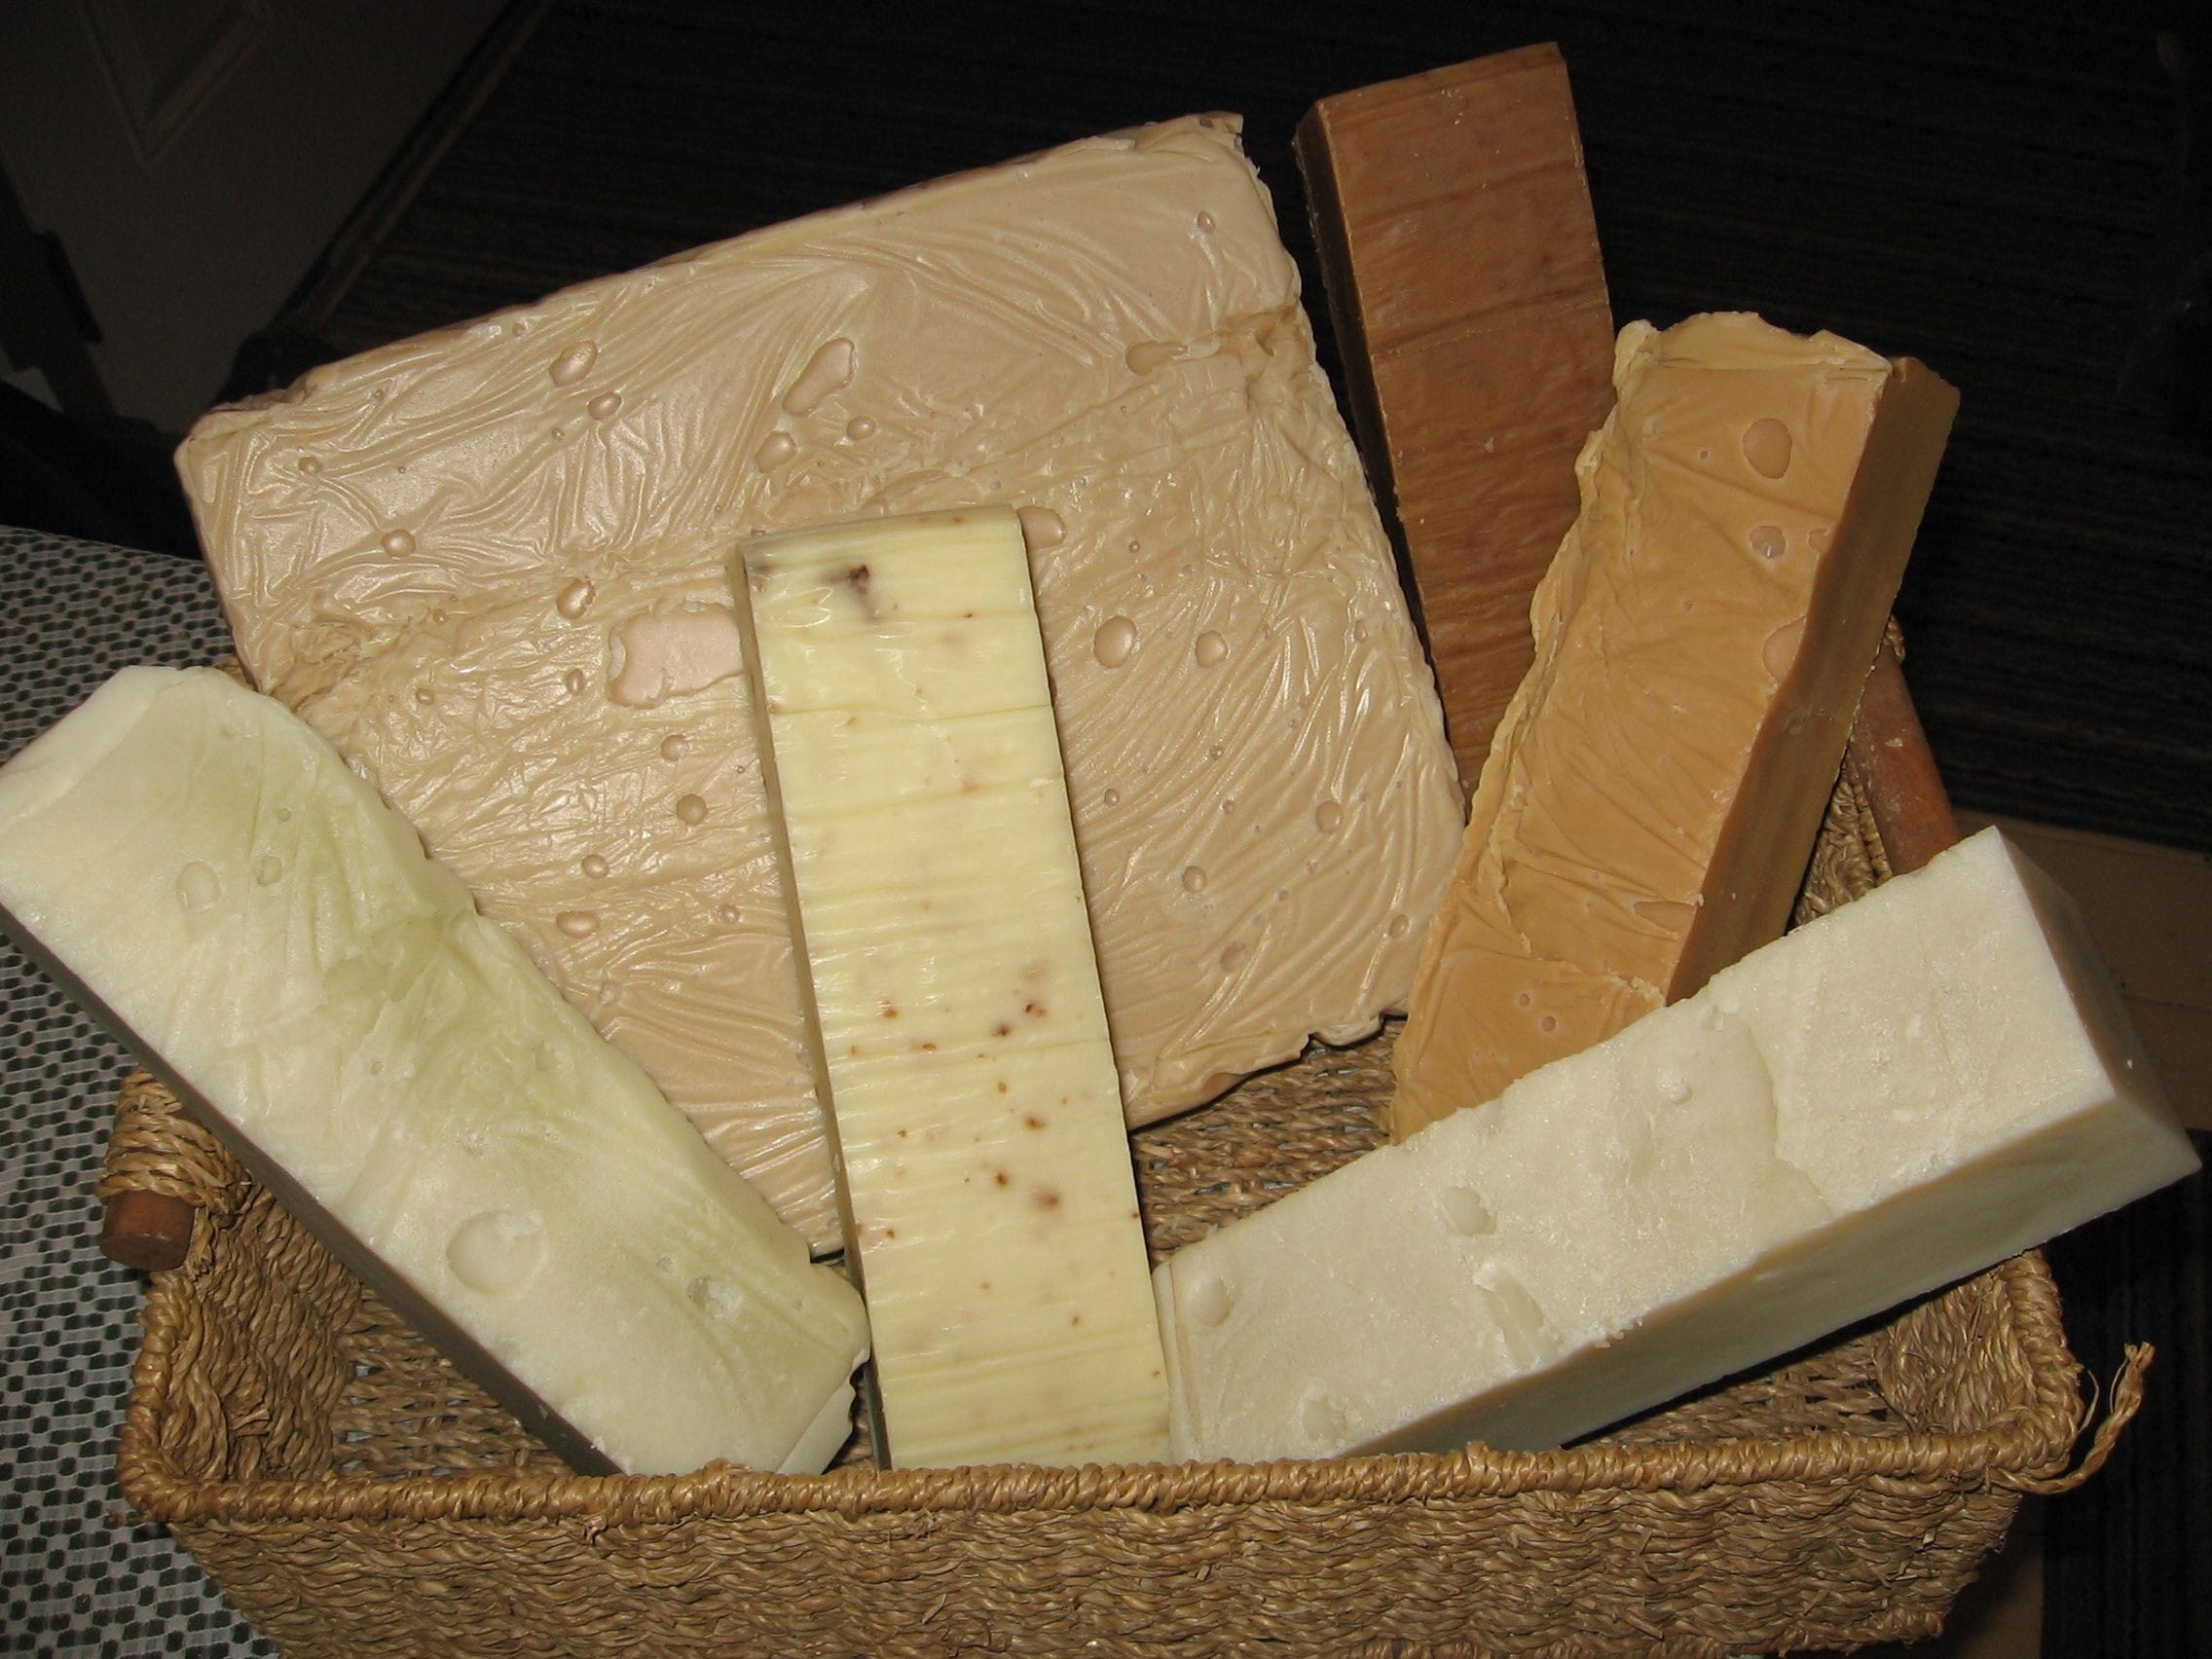 Many varieties of our truly natural soap is offered in economical Eight Bar Slabs which helps you save dollars on our already reasonably priced handmade soap.